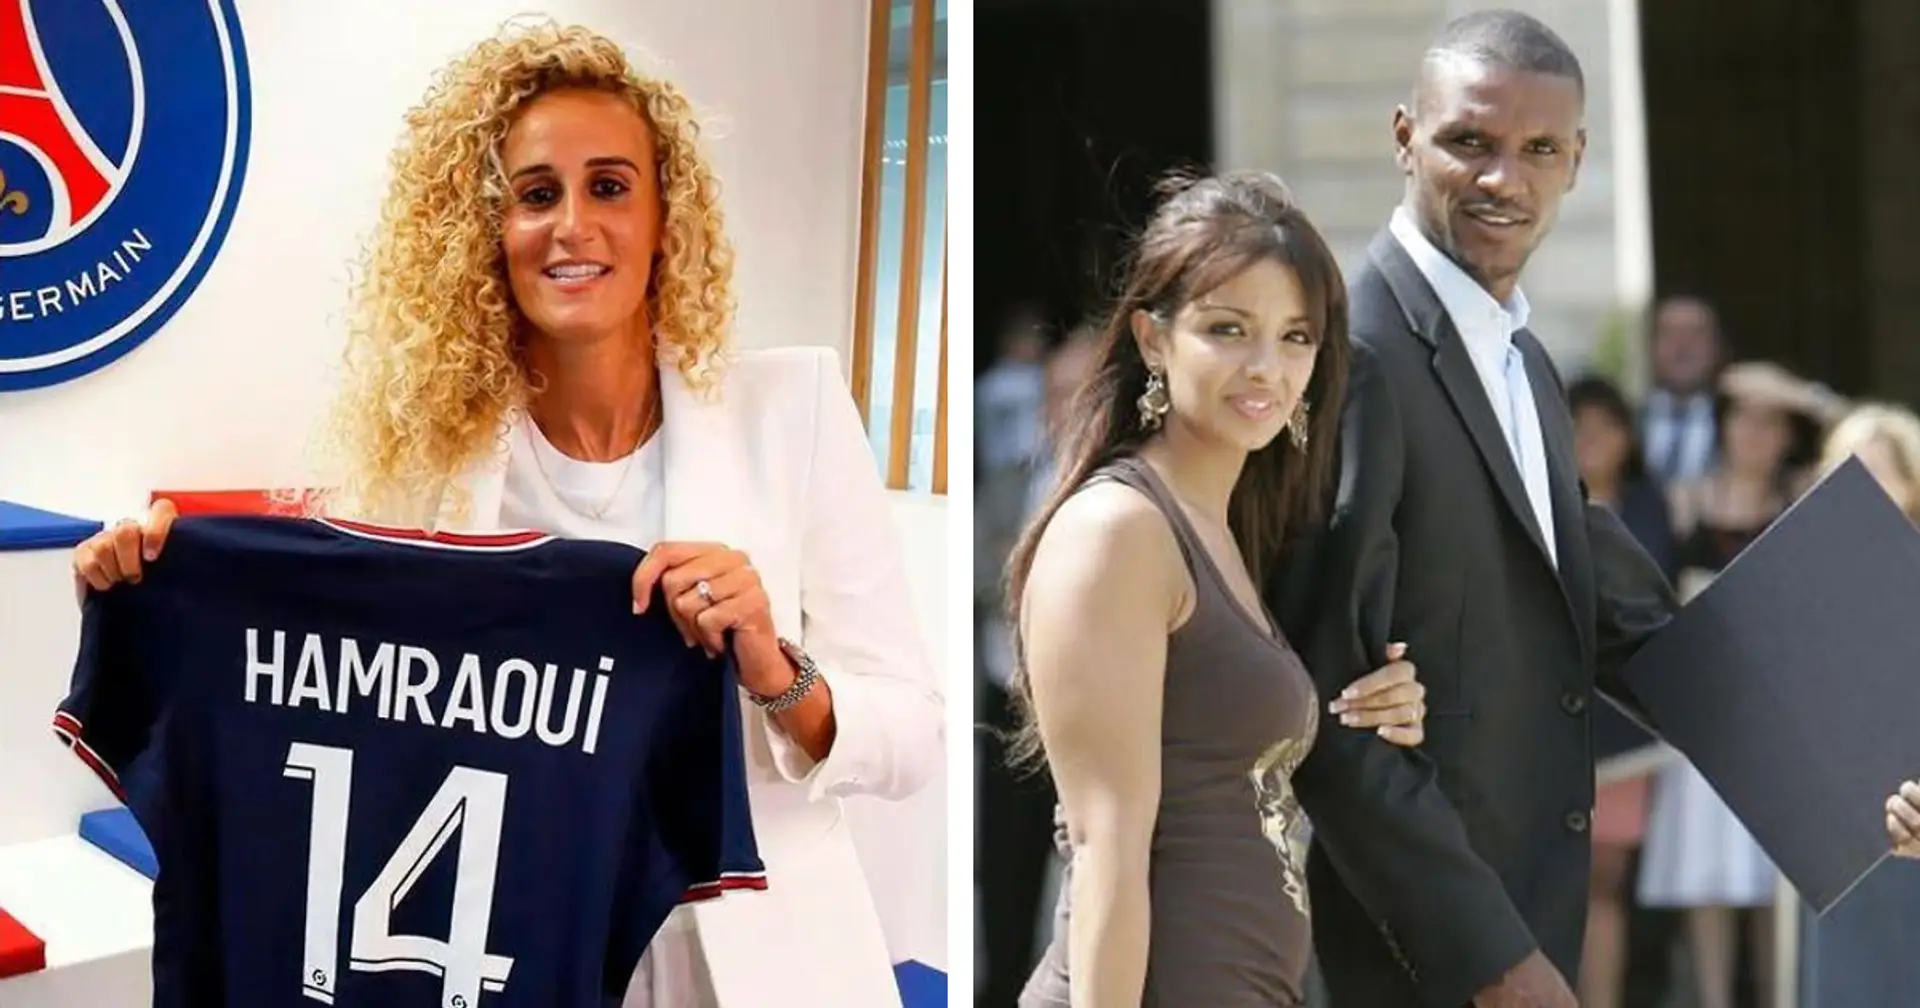 Eric Abidal's wife reportedly responsible for brutal attack on PSG star Kheira Hamraoui